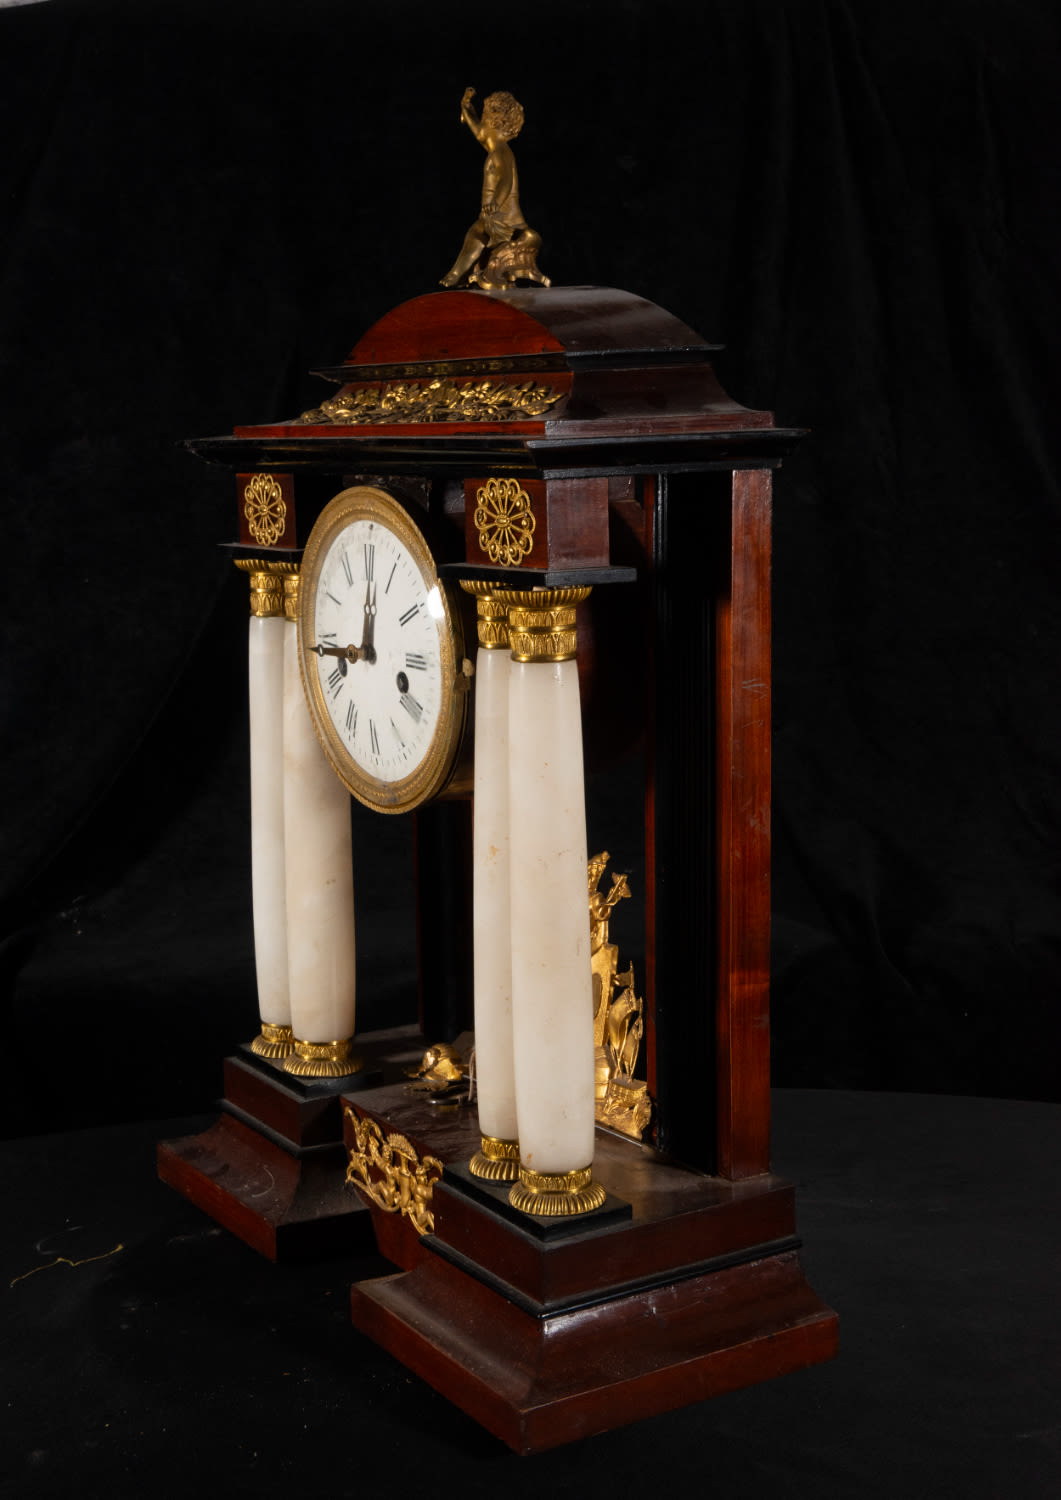 Beautiful Bilderrahmen Table Clock with Automata from the late 19th century, Austria, with Mercury a - Image 5 of 7